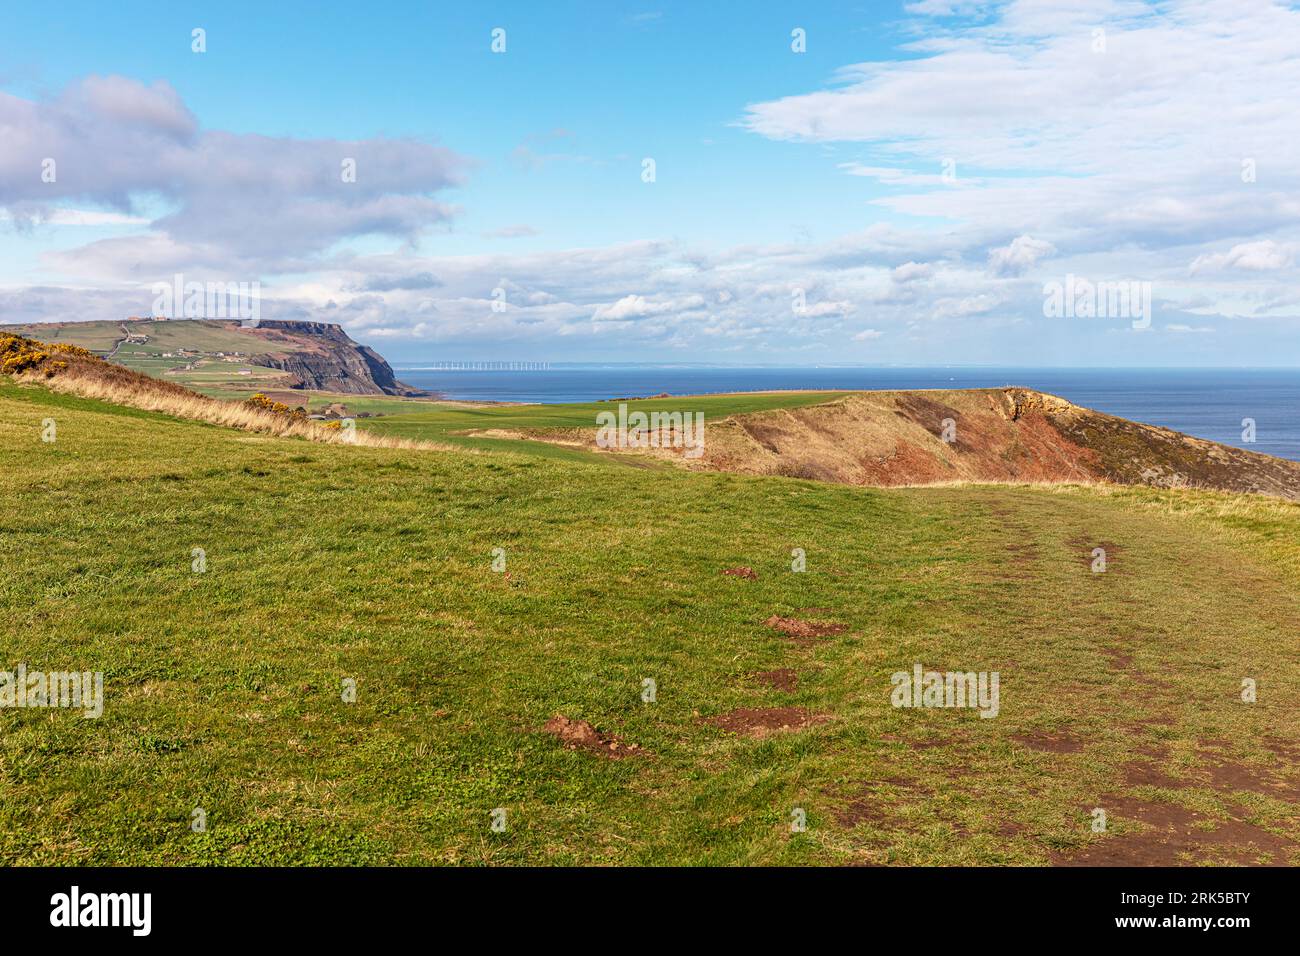 The Cleveland Way, North Yorkshire Coast, UK, England, The walk from Port Mulgrave to staithes on the Cleveland Way, cliff walk Stock Photo